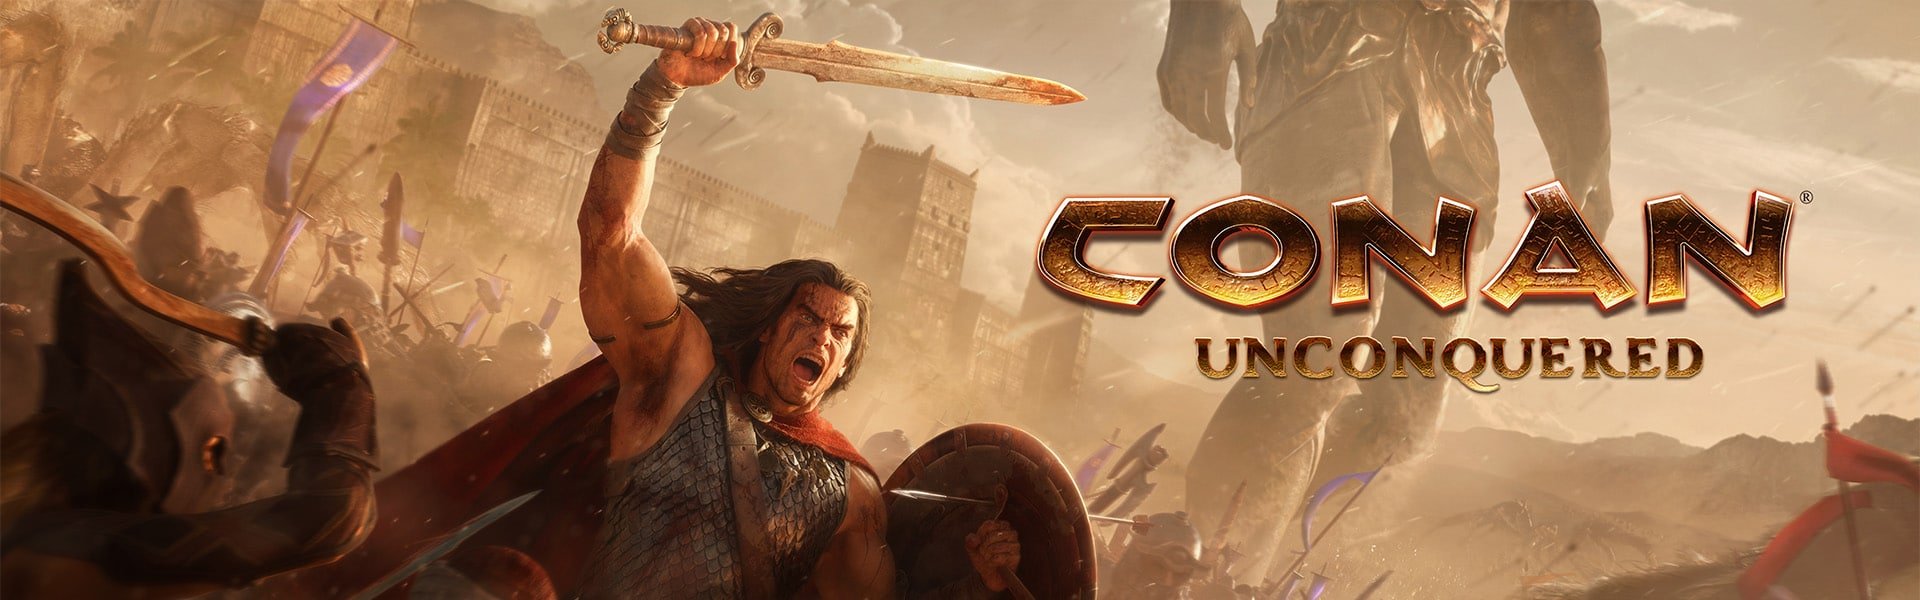 Survival RTS, Conan Unconquered, is now out! 13